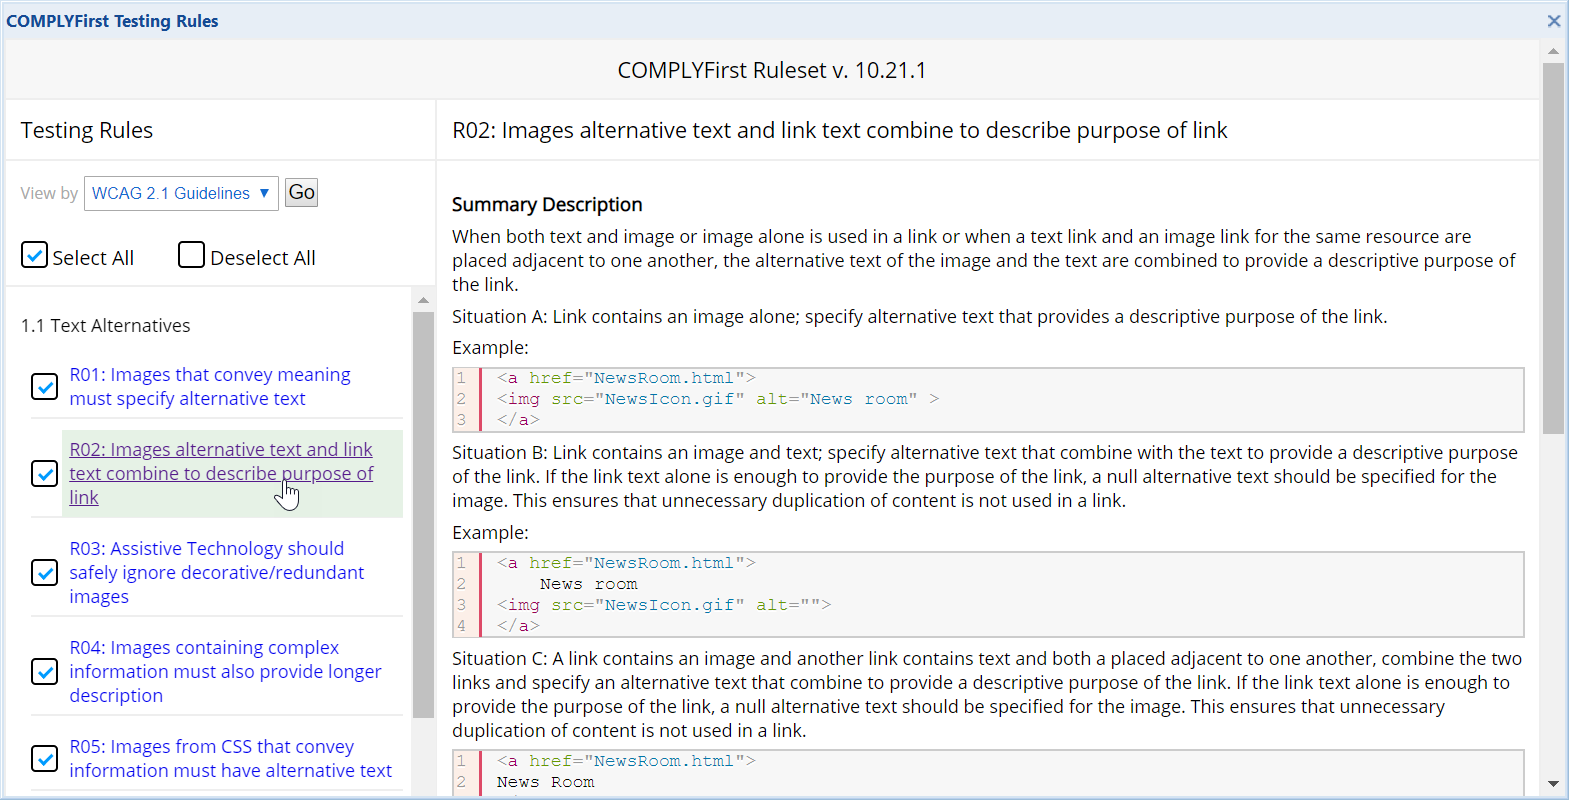 Sample COMPLYFirst Ruleset v.10.21.1 interface: showing Rules 1 to 5 navigation links with Rule 2 details